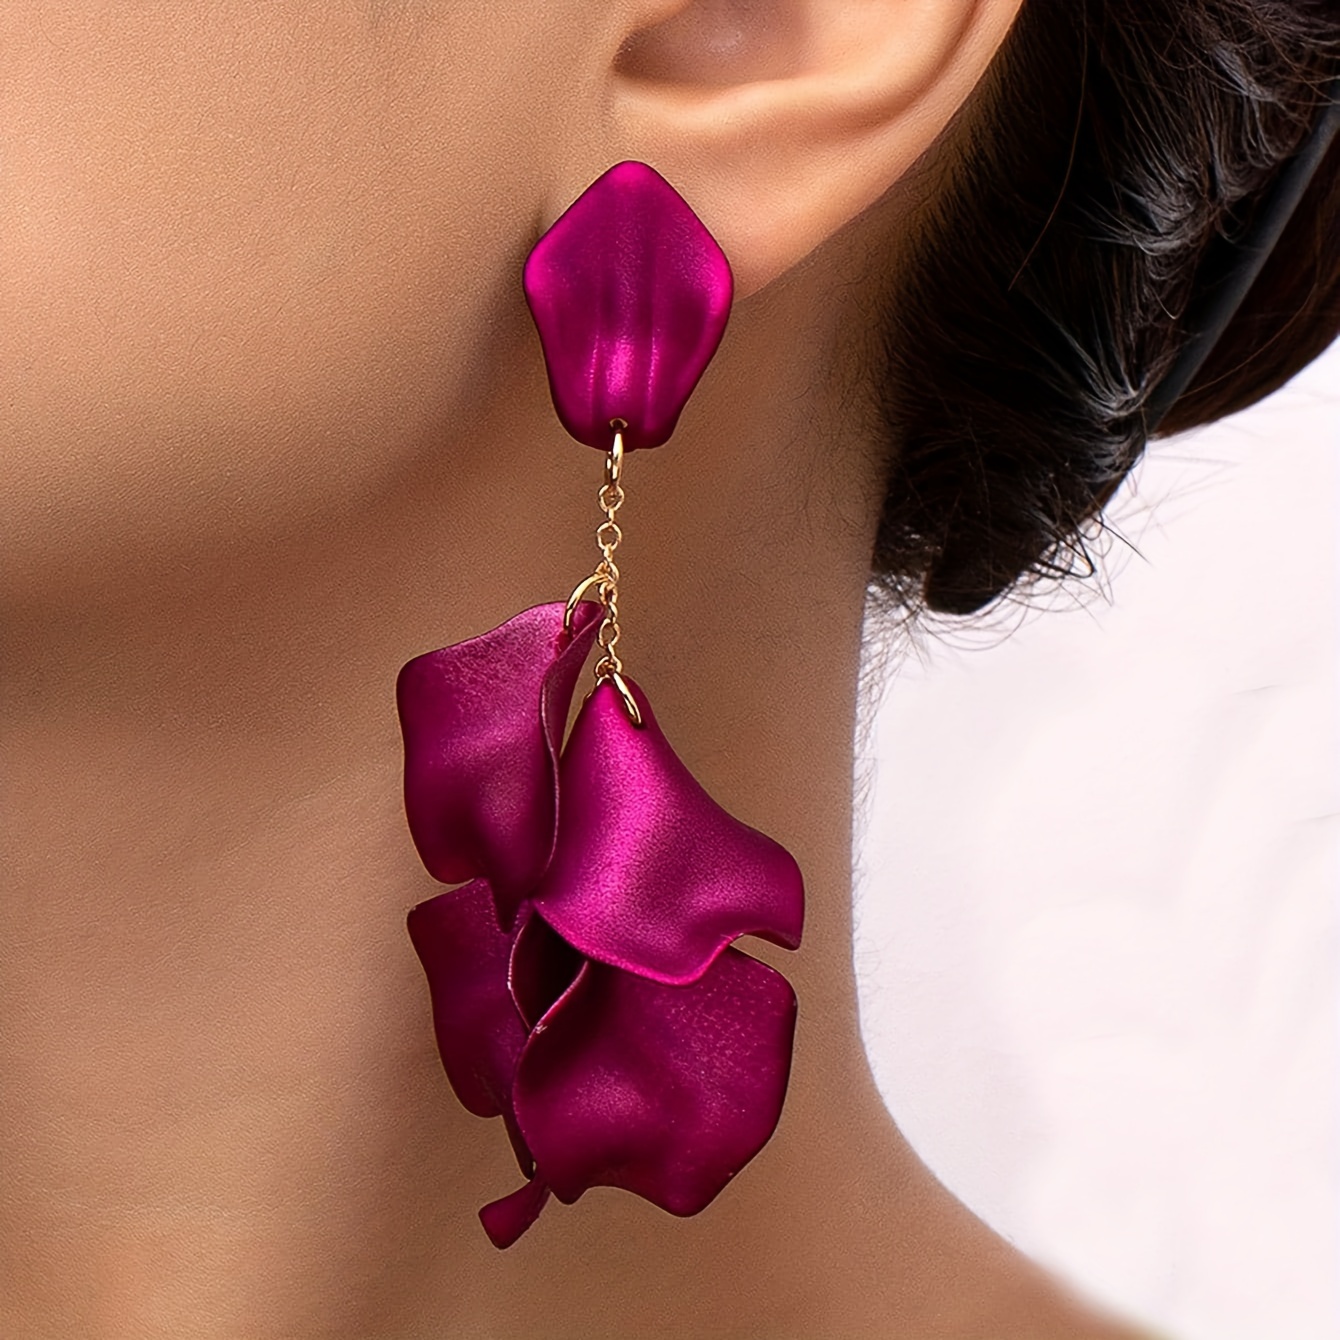 Exclusive Handmade Earrings, Silk Fabric Wrapped Blossom Flower-shaped Boho  Earrings for Women, Bohemian Style Exaggerated Rose Pink Dangly Earrings